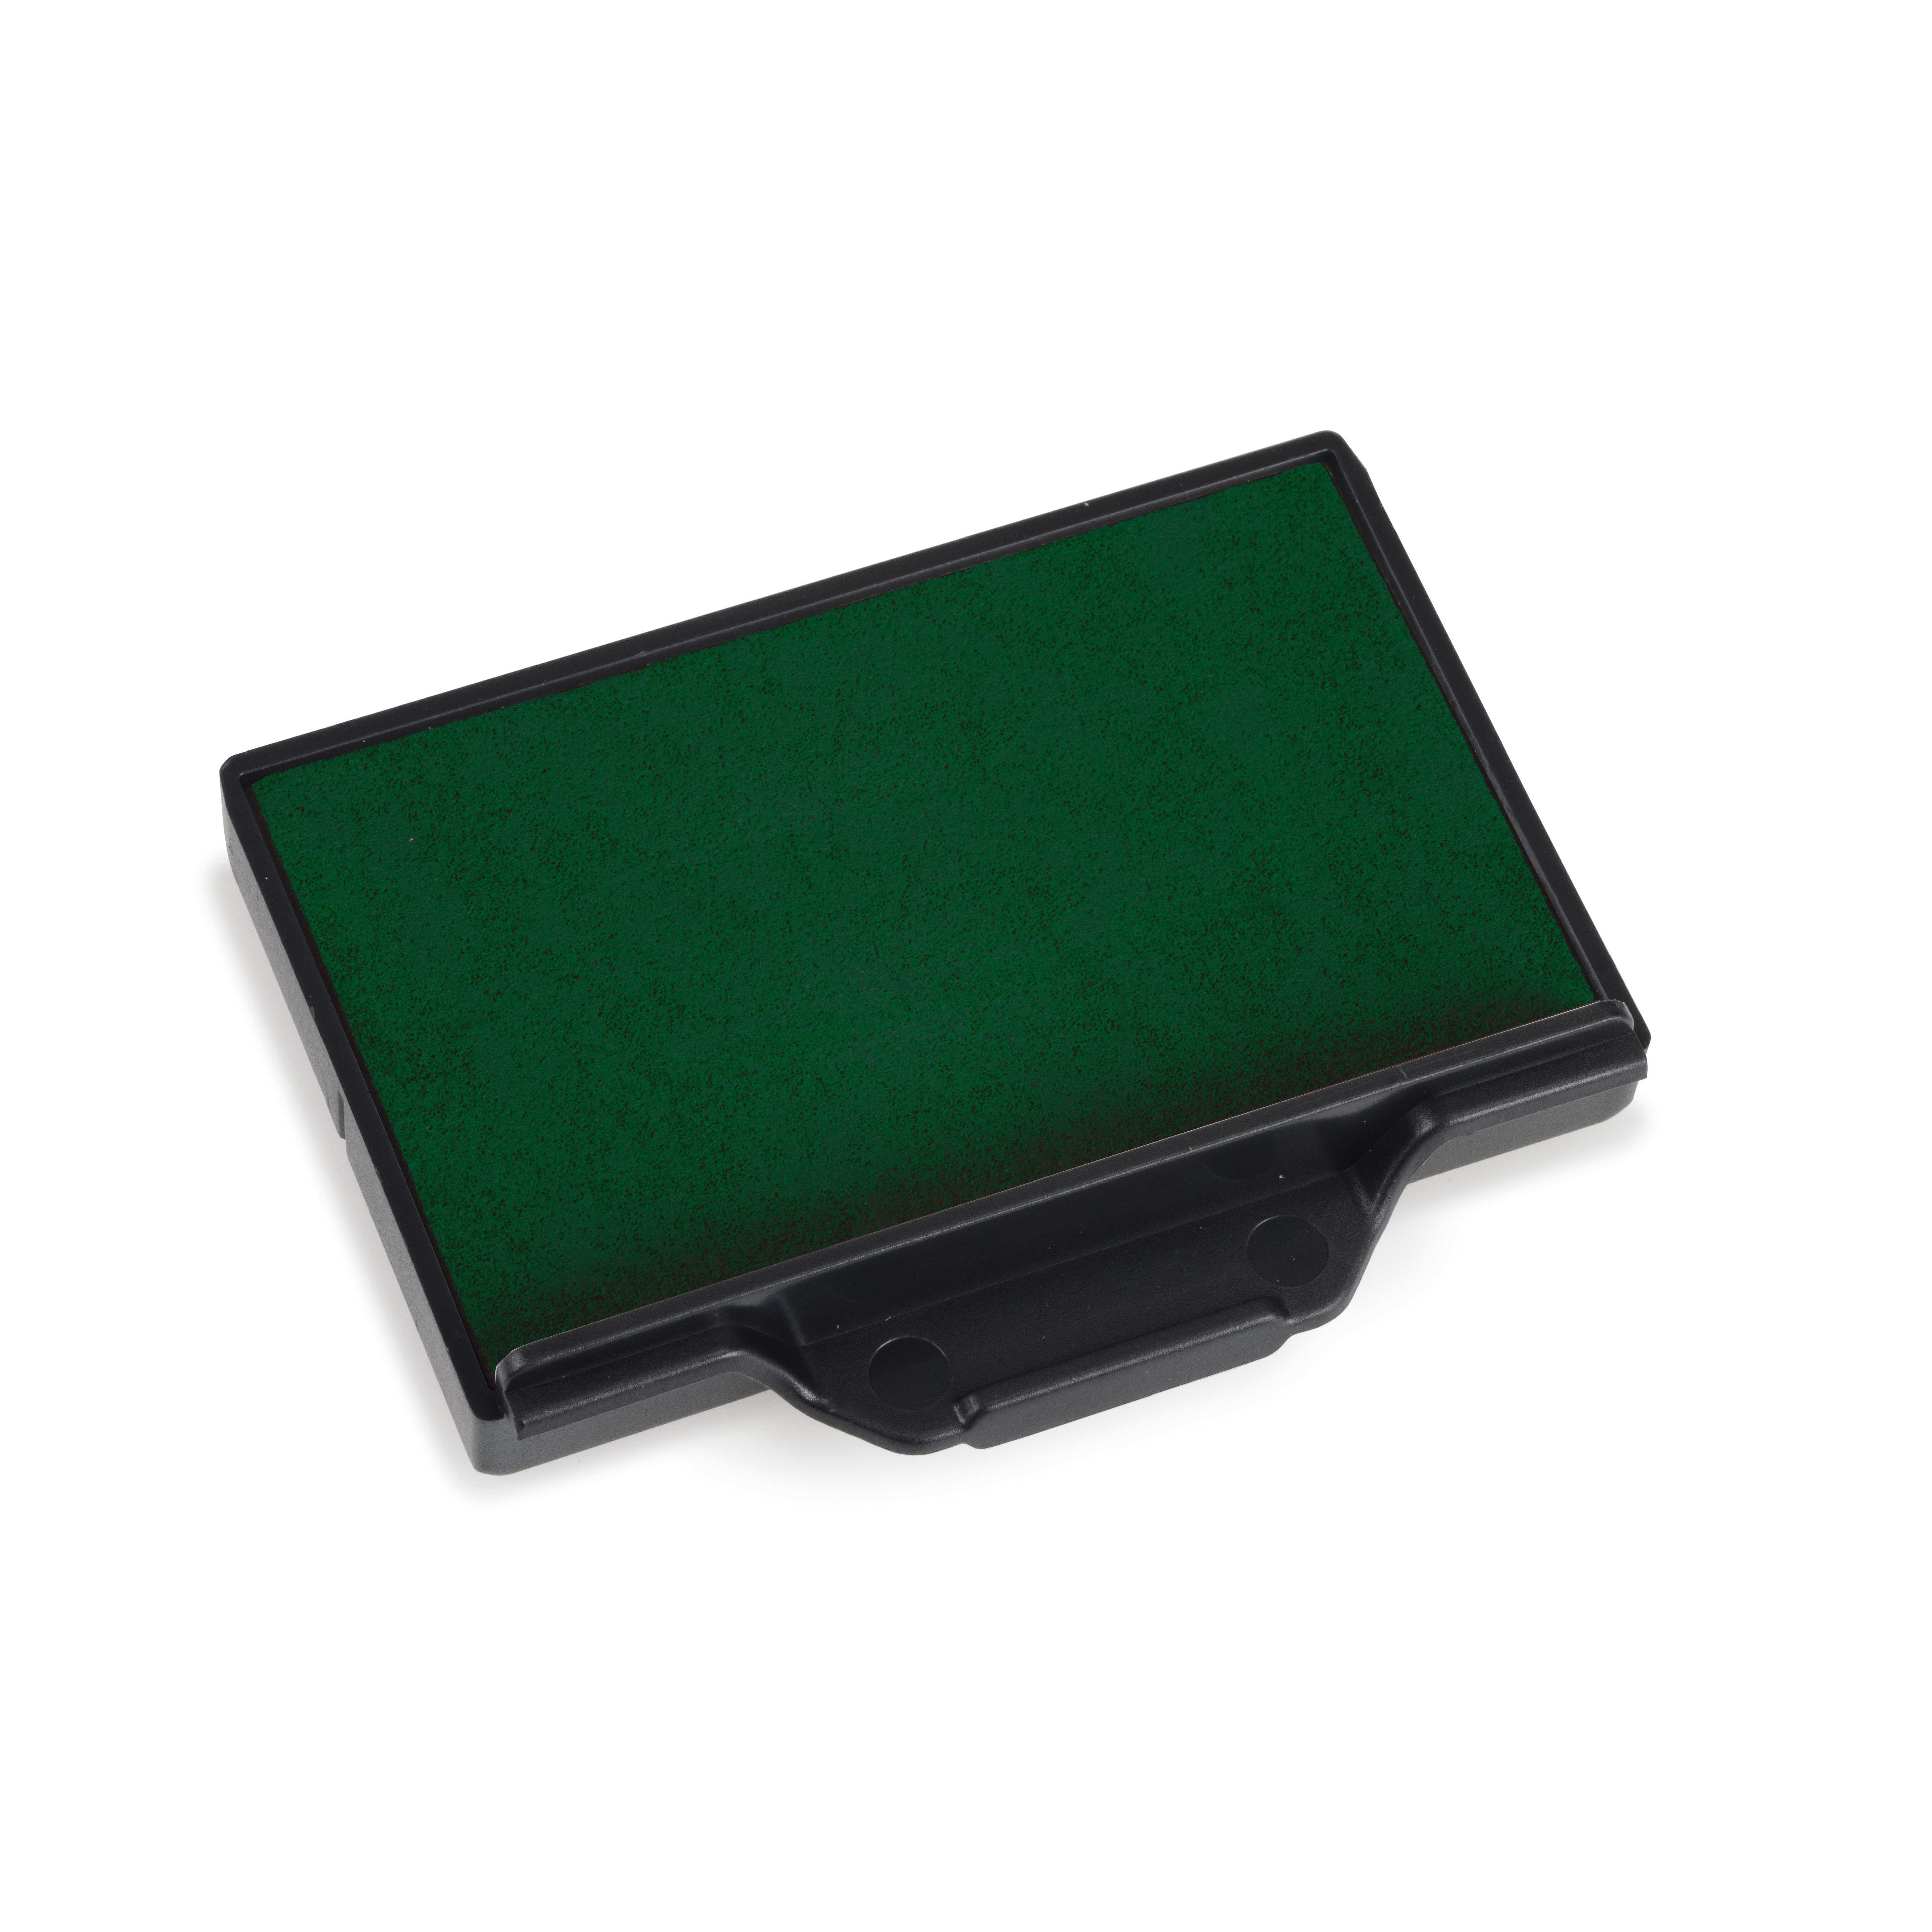 Replacement Pad for Trodat 5204 Self Inking Stamp - Green Ink Color